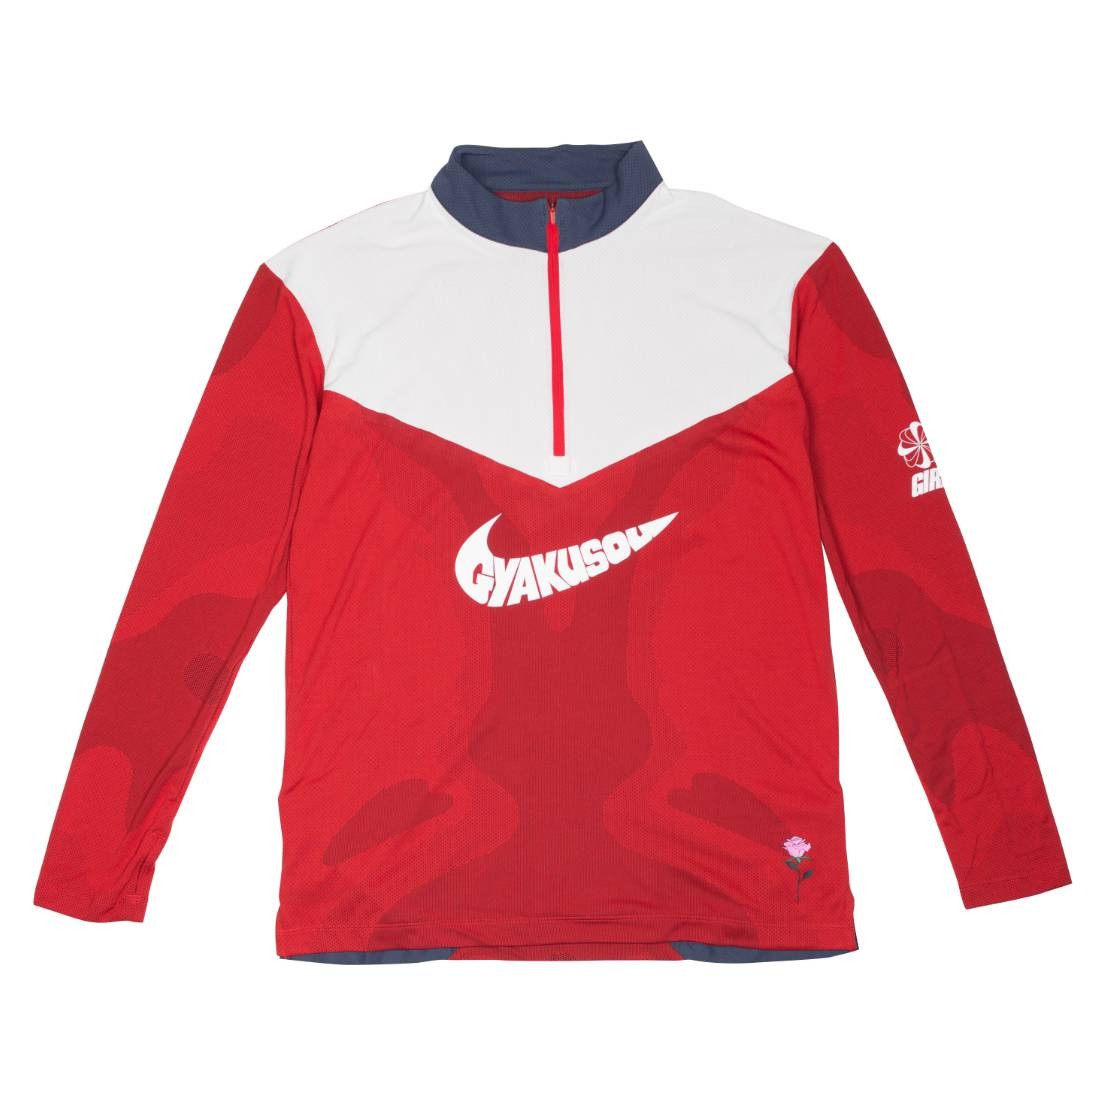 red and blue nike shirt